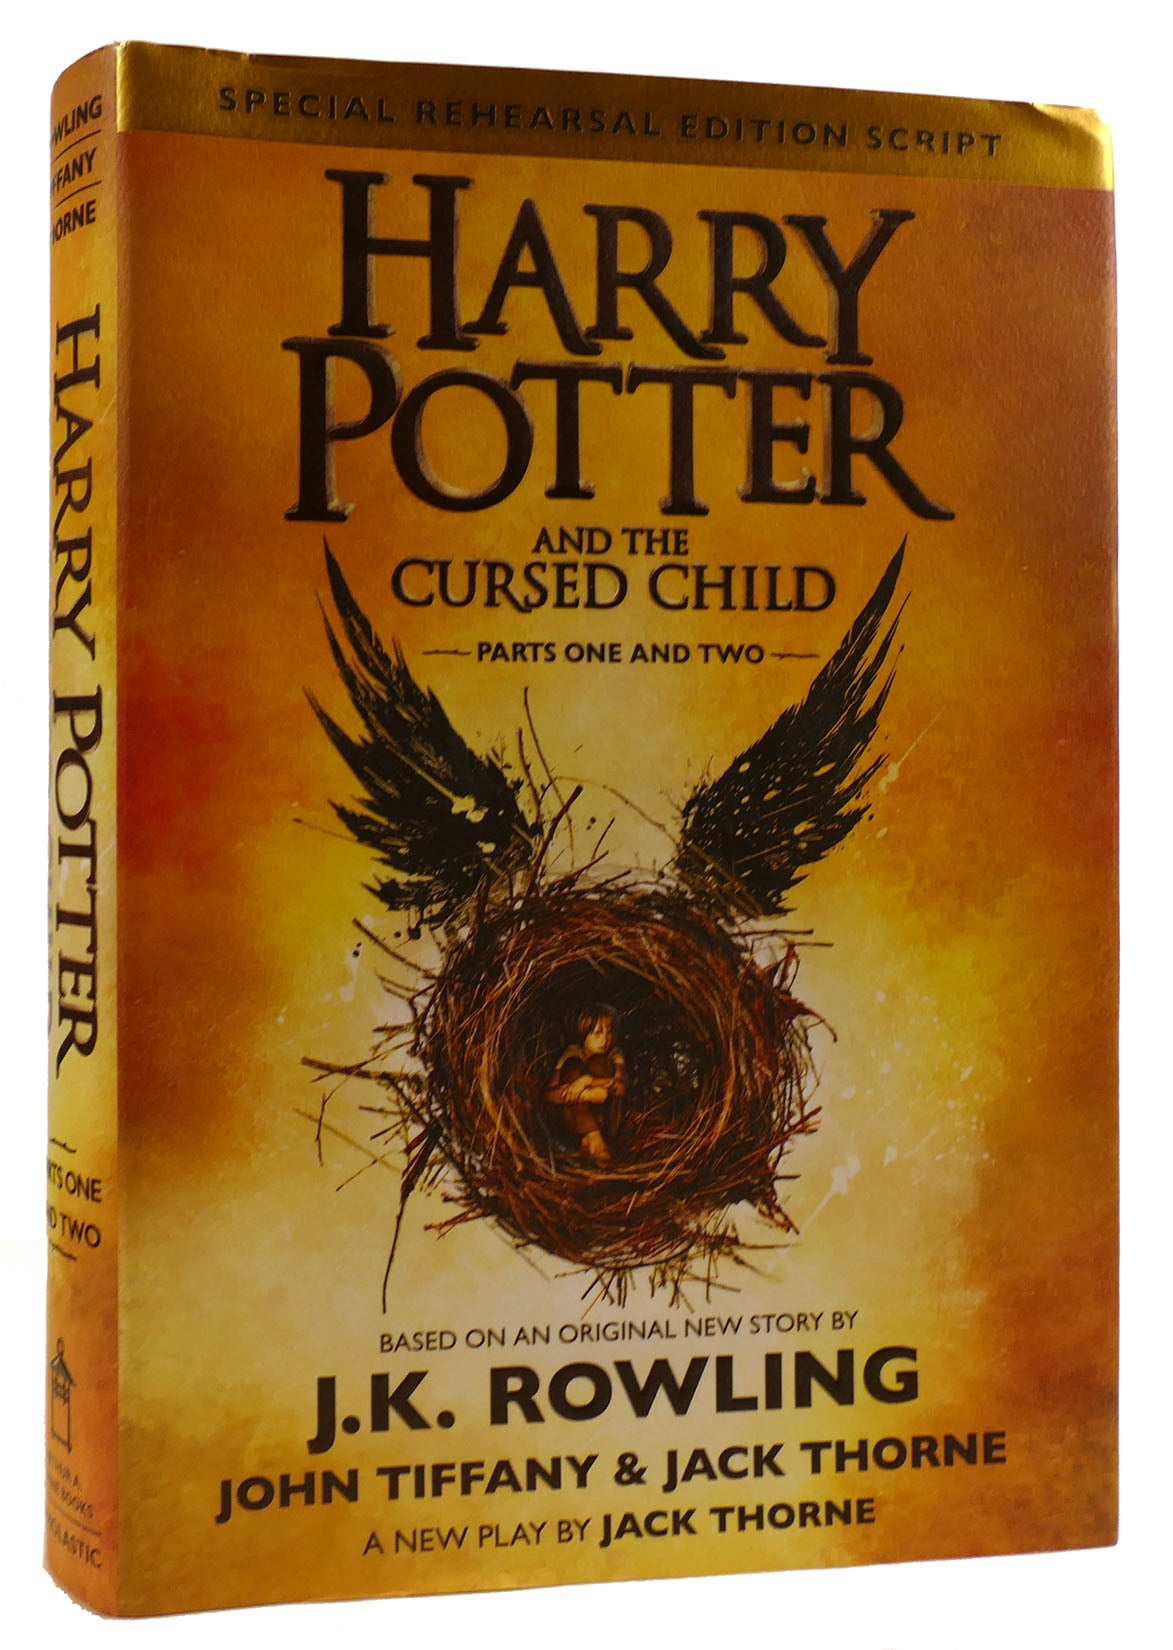 HARRY POTTER AND THE CURSED CHILD, PARTS 1 & 2: SPECIAL REHEARSAL EDITION  SCRIPT, Jack Thorne J. K. Rowling, John Tiffany